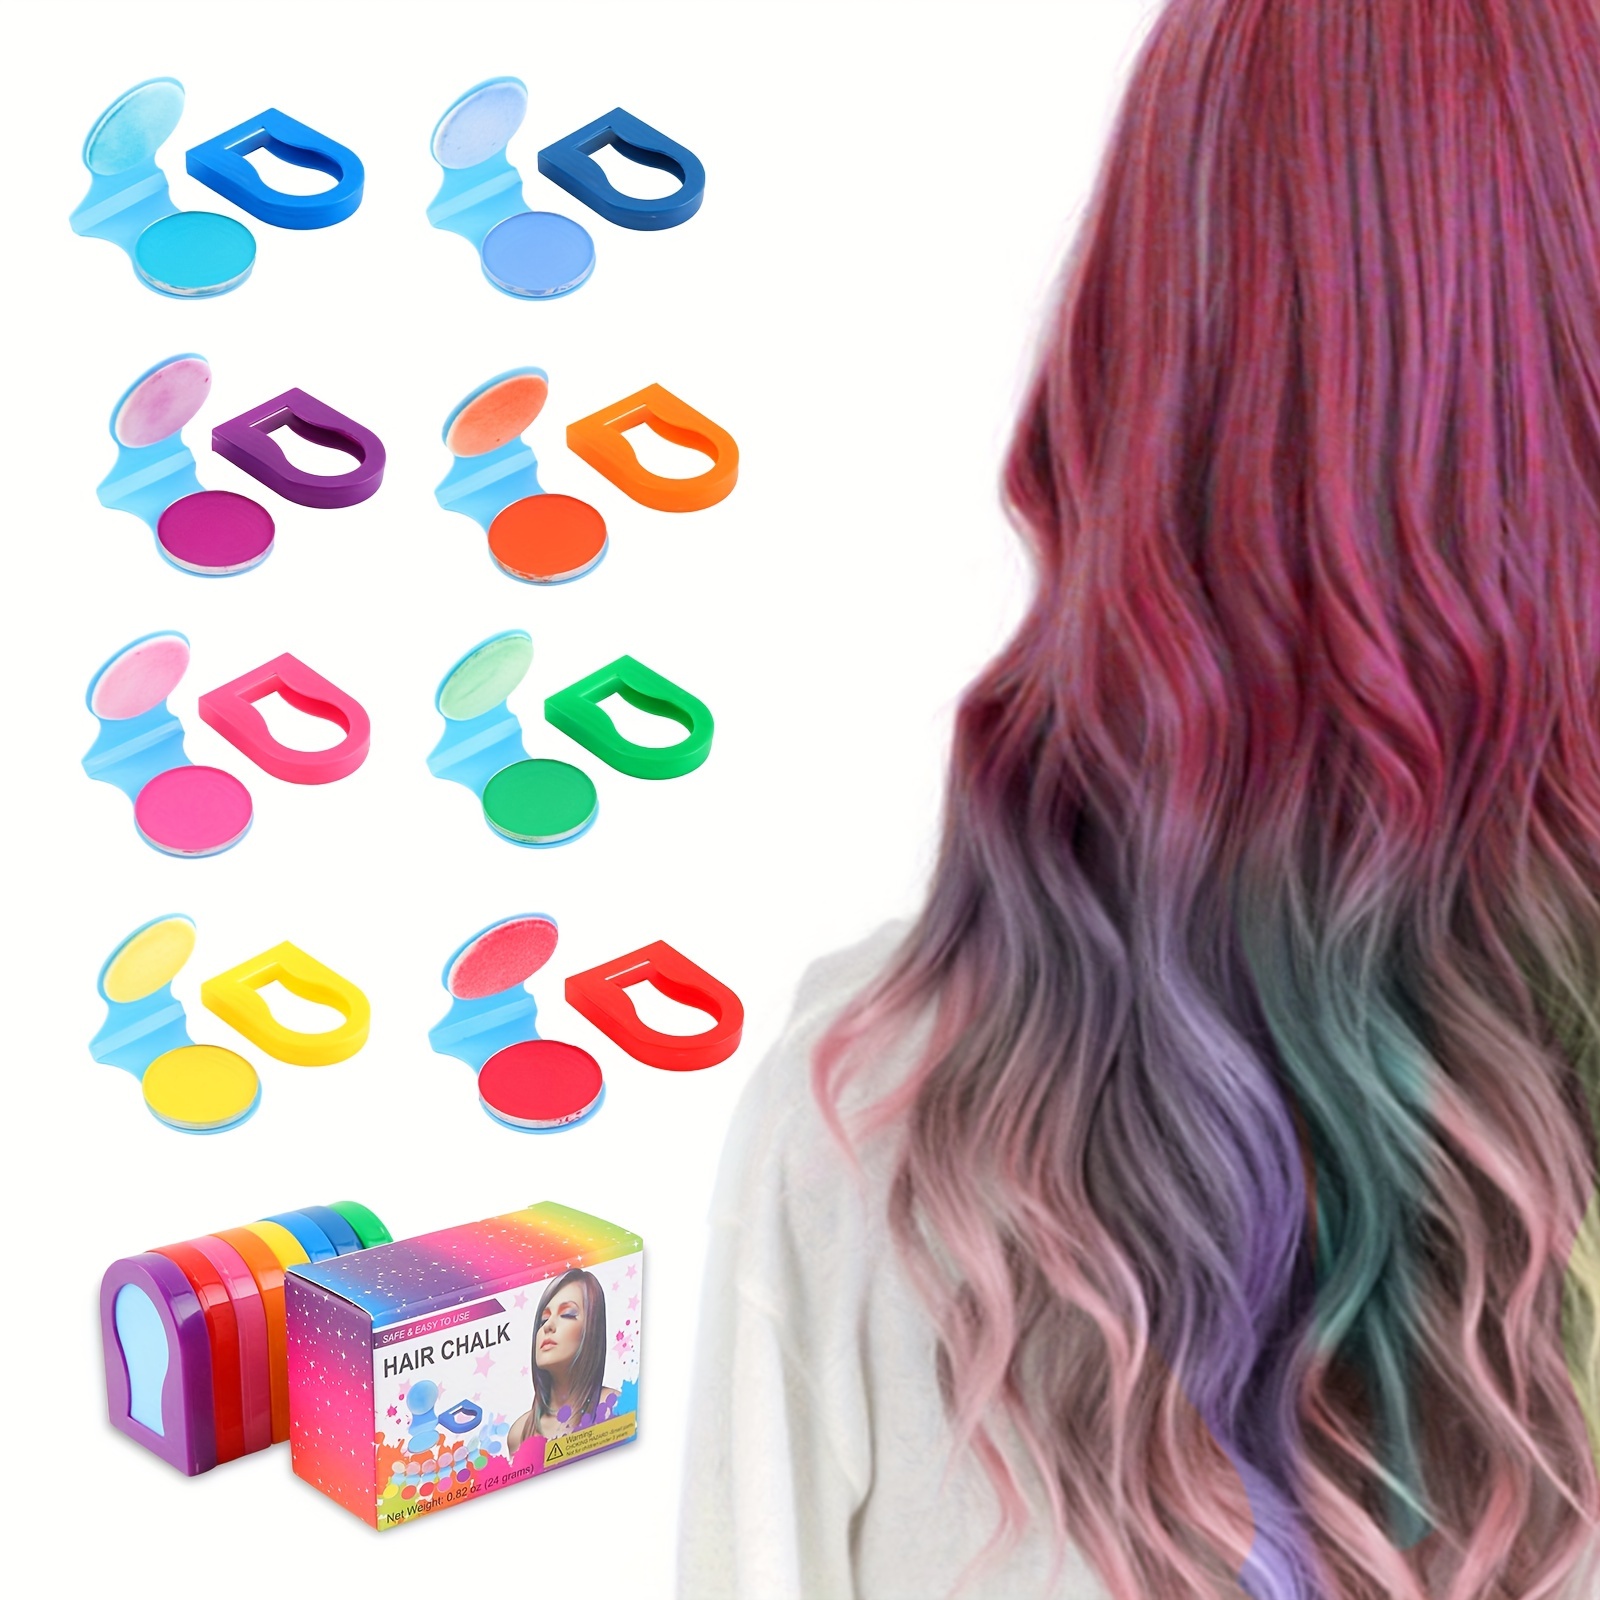 10 Colors Hair Chalk for Kids&Girls Makeup Kit, Hair Chalk Comb Temporary  Washable Hair Color Dye for Kids Girls Birthday Gifts Easter Children's Day